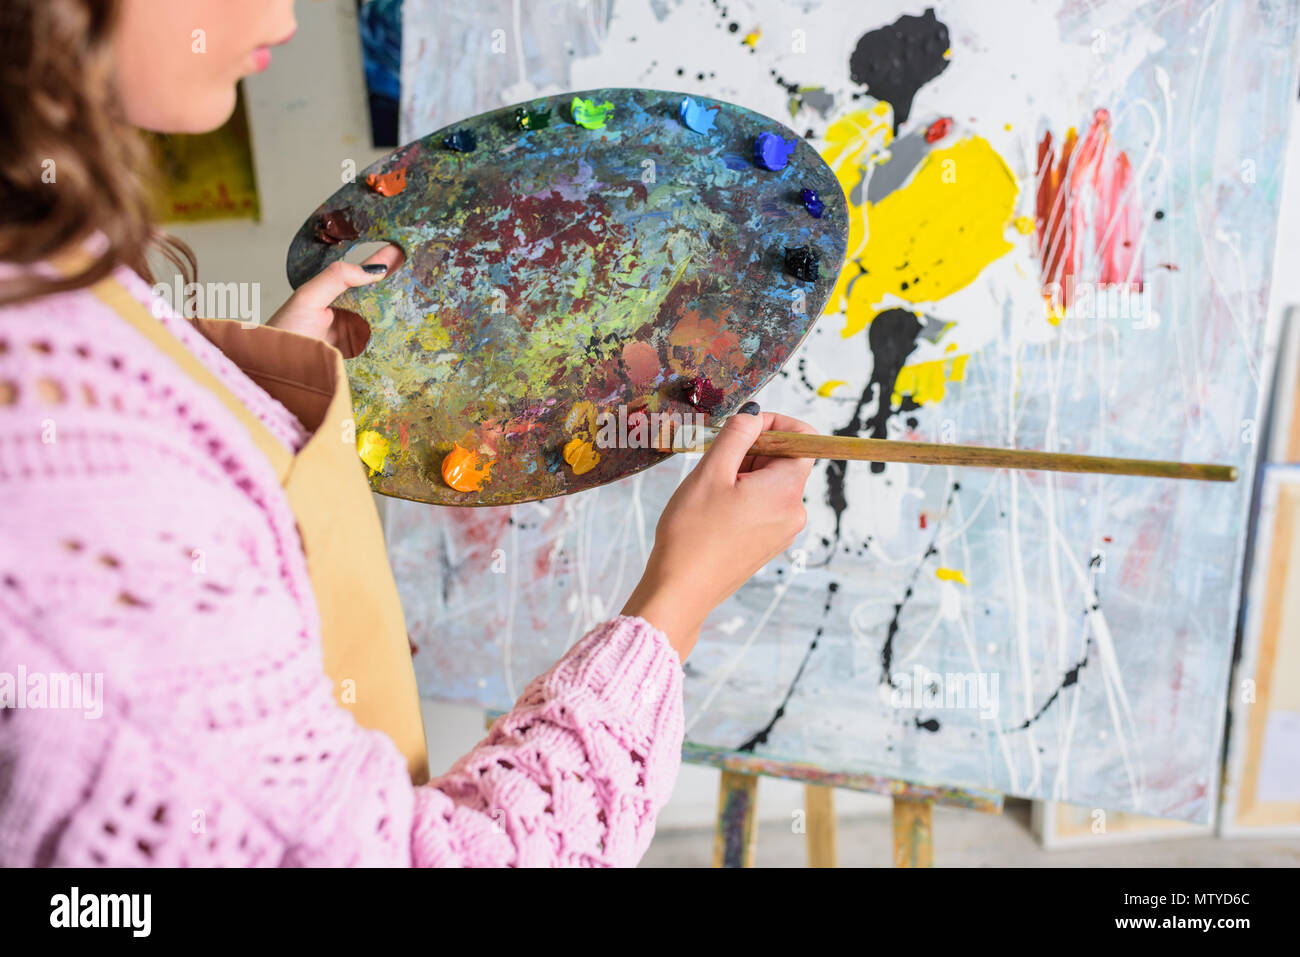 cropped image of female artist taking paint from palette in workshop Stock Photo